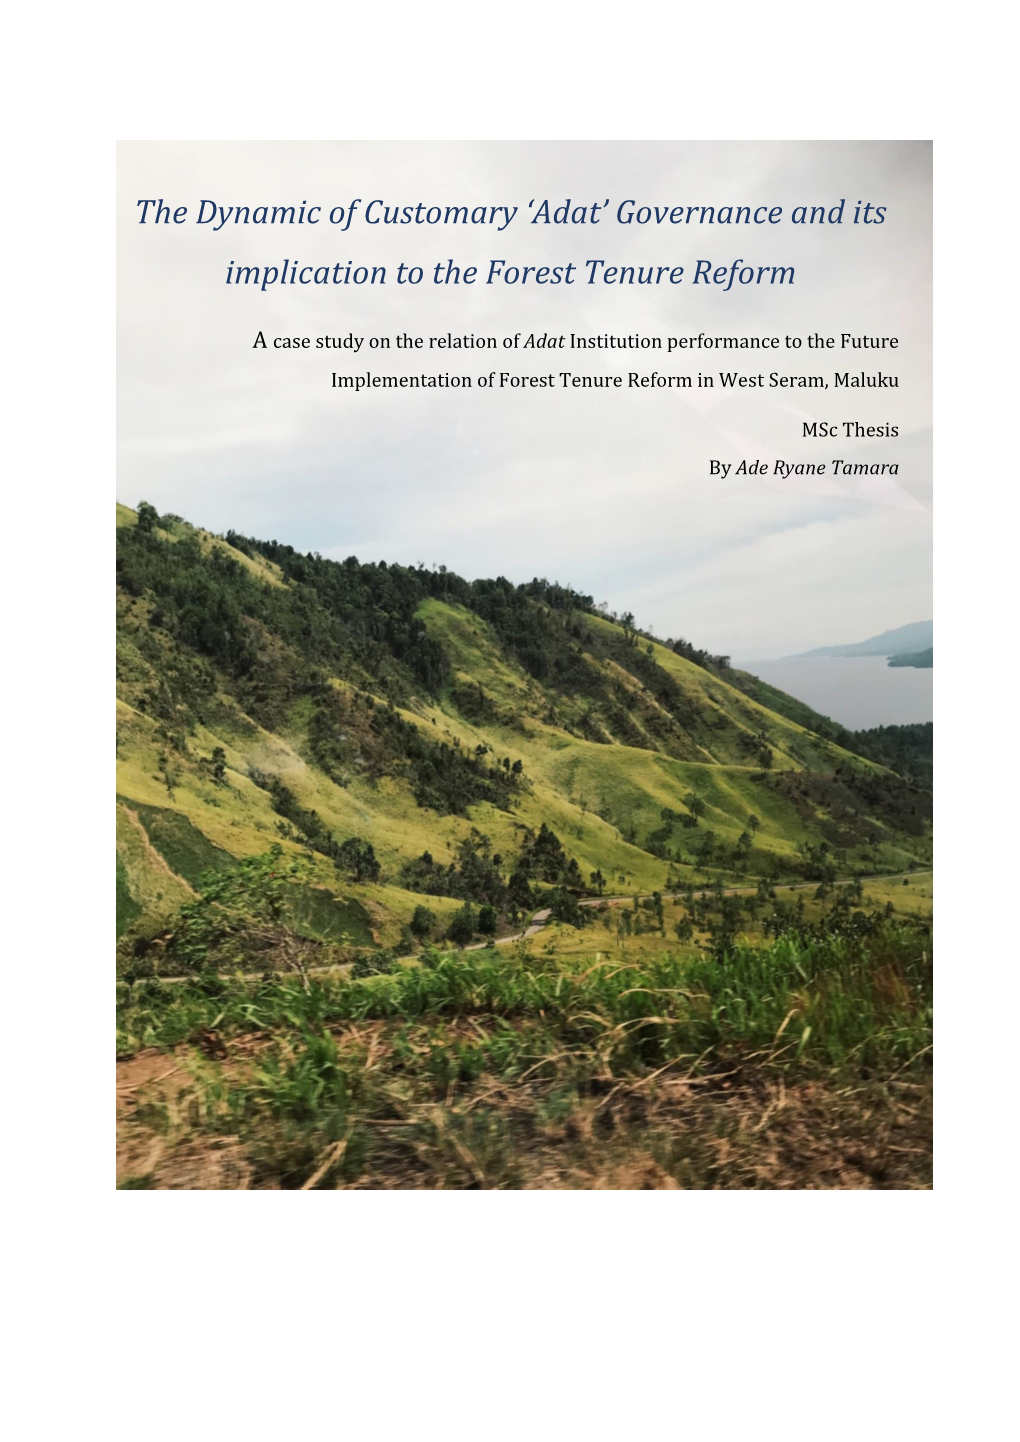 'Adat' Governance and Its Implication to the Forest Tenure Reform